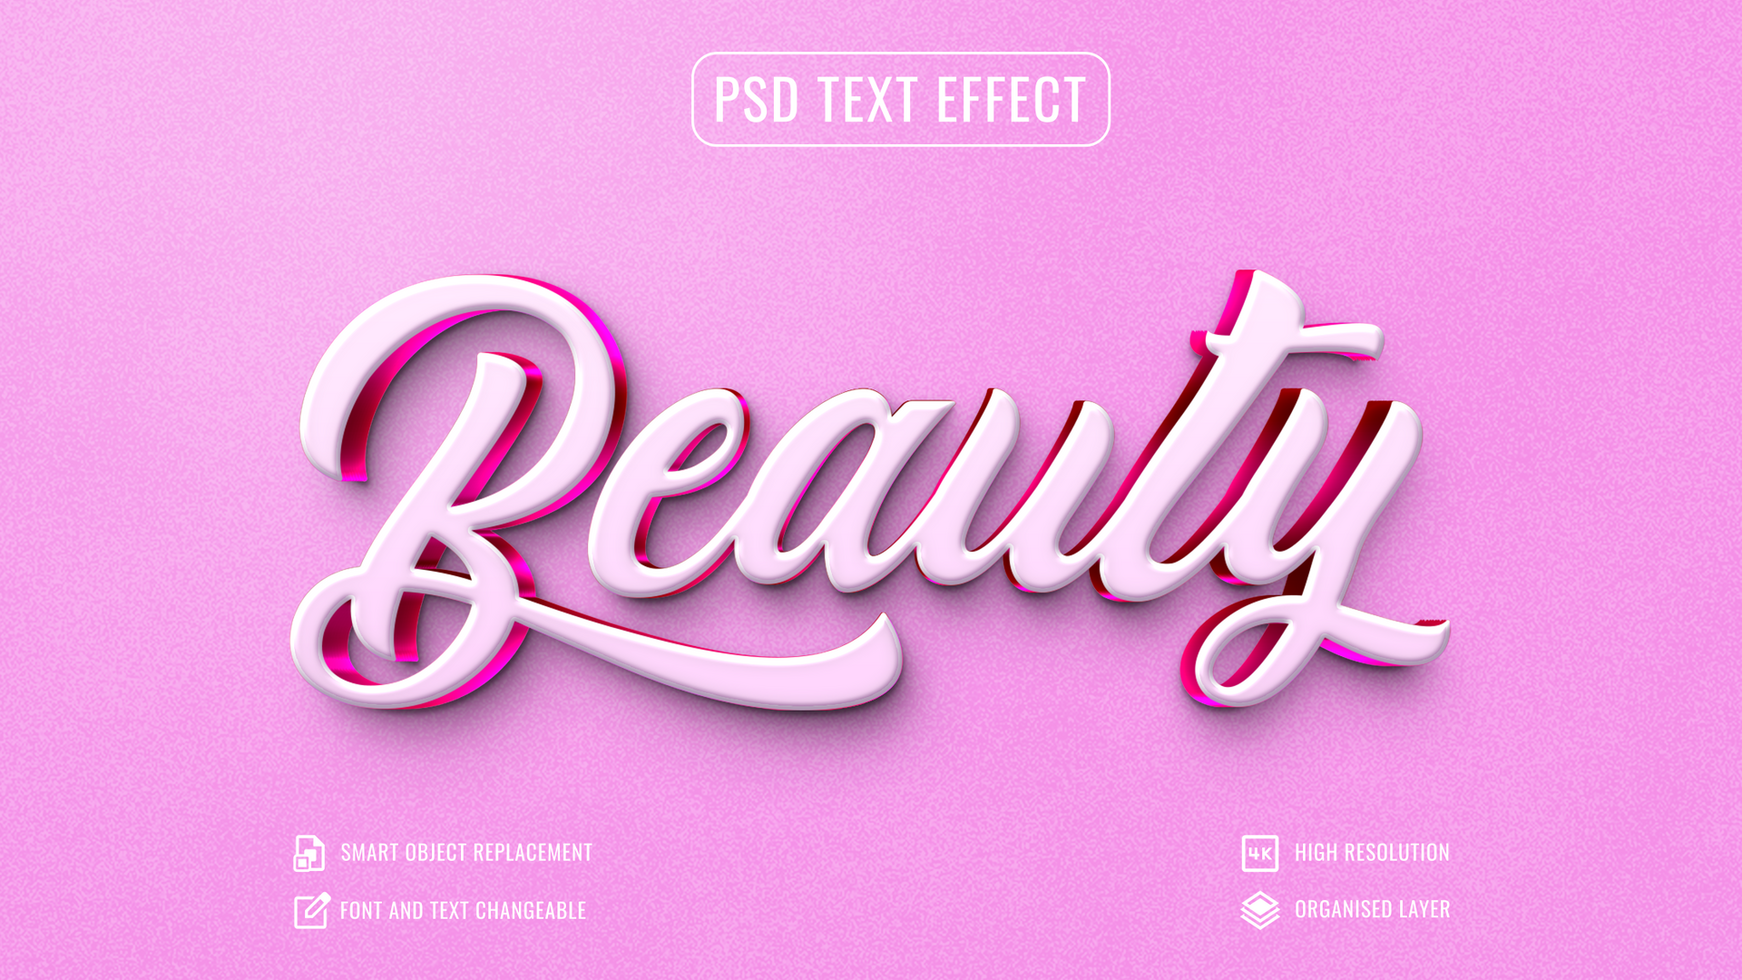 beauty text effect with pink background psd